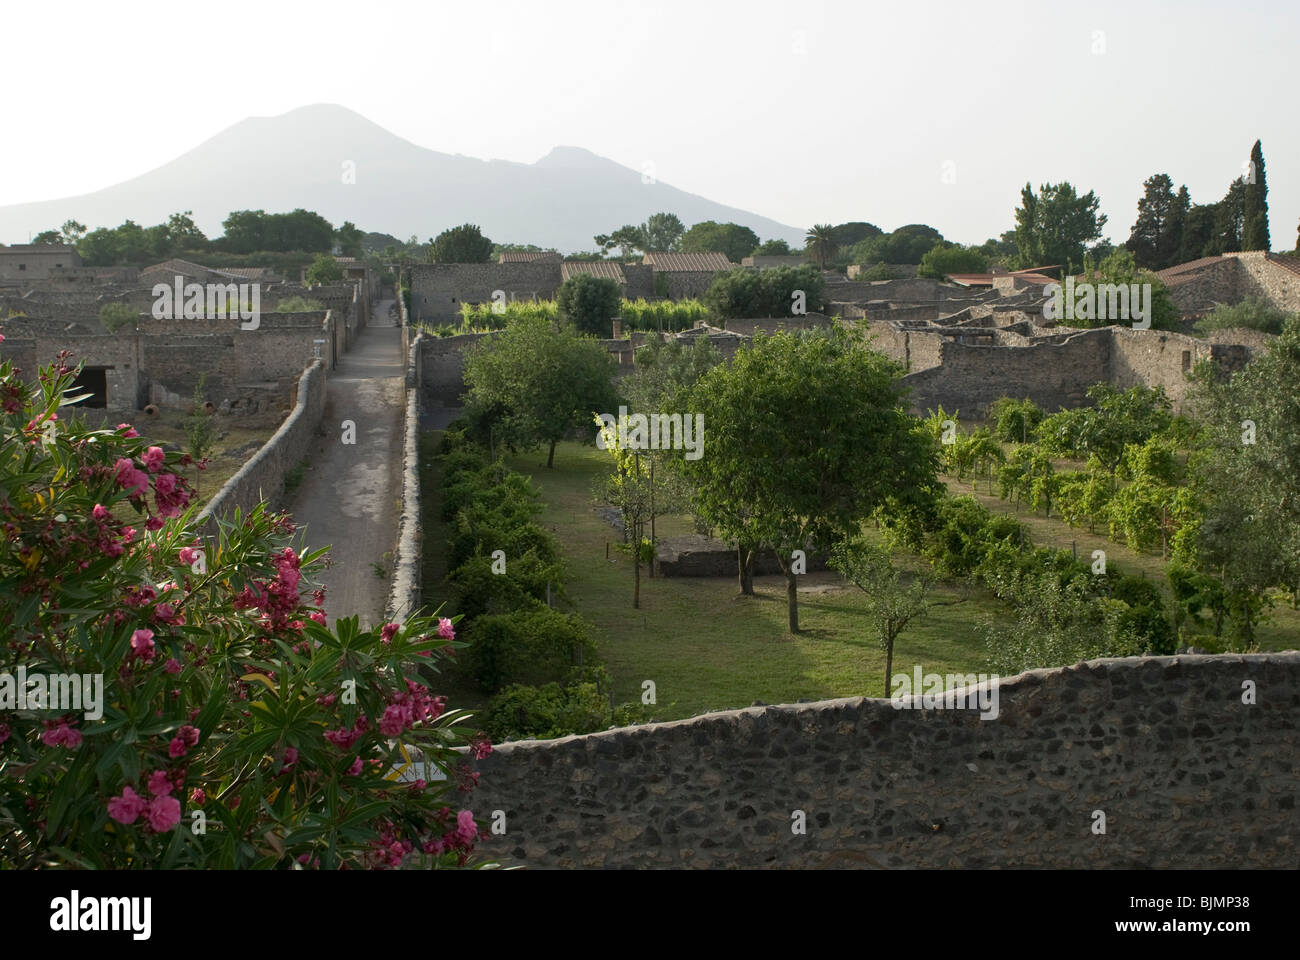 Italy, Campania, Pompeii, archaeological district, excavations of the Roman town of Pompeii, Vesuv in the background Stock Photo